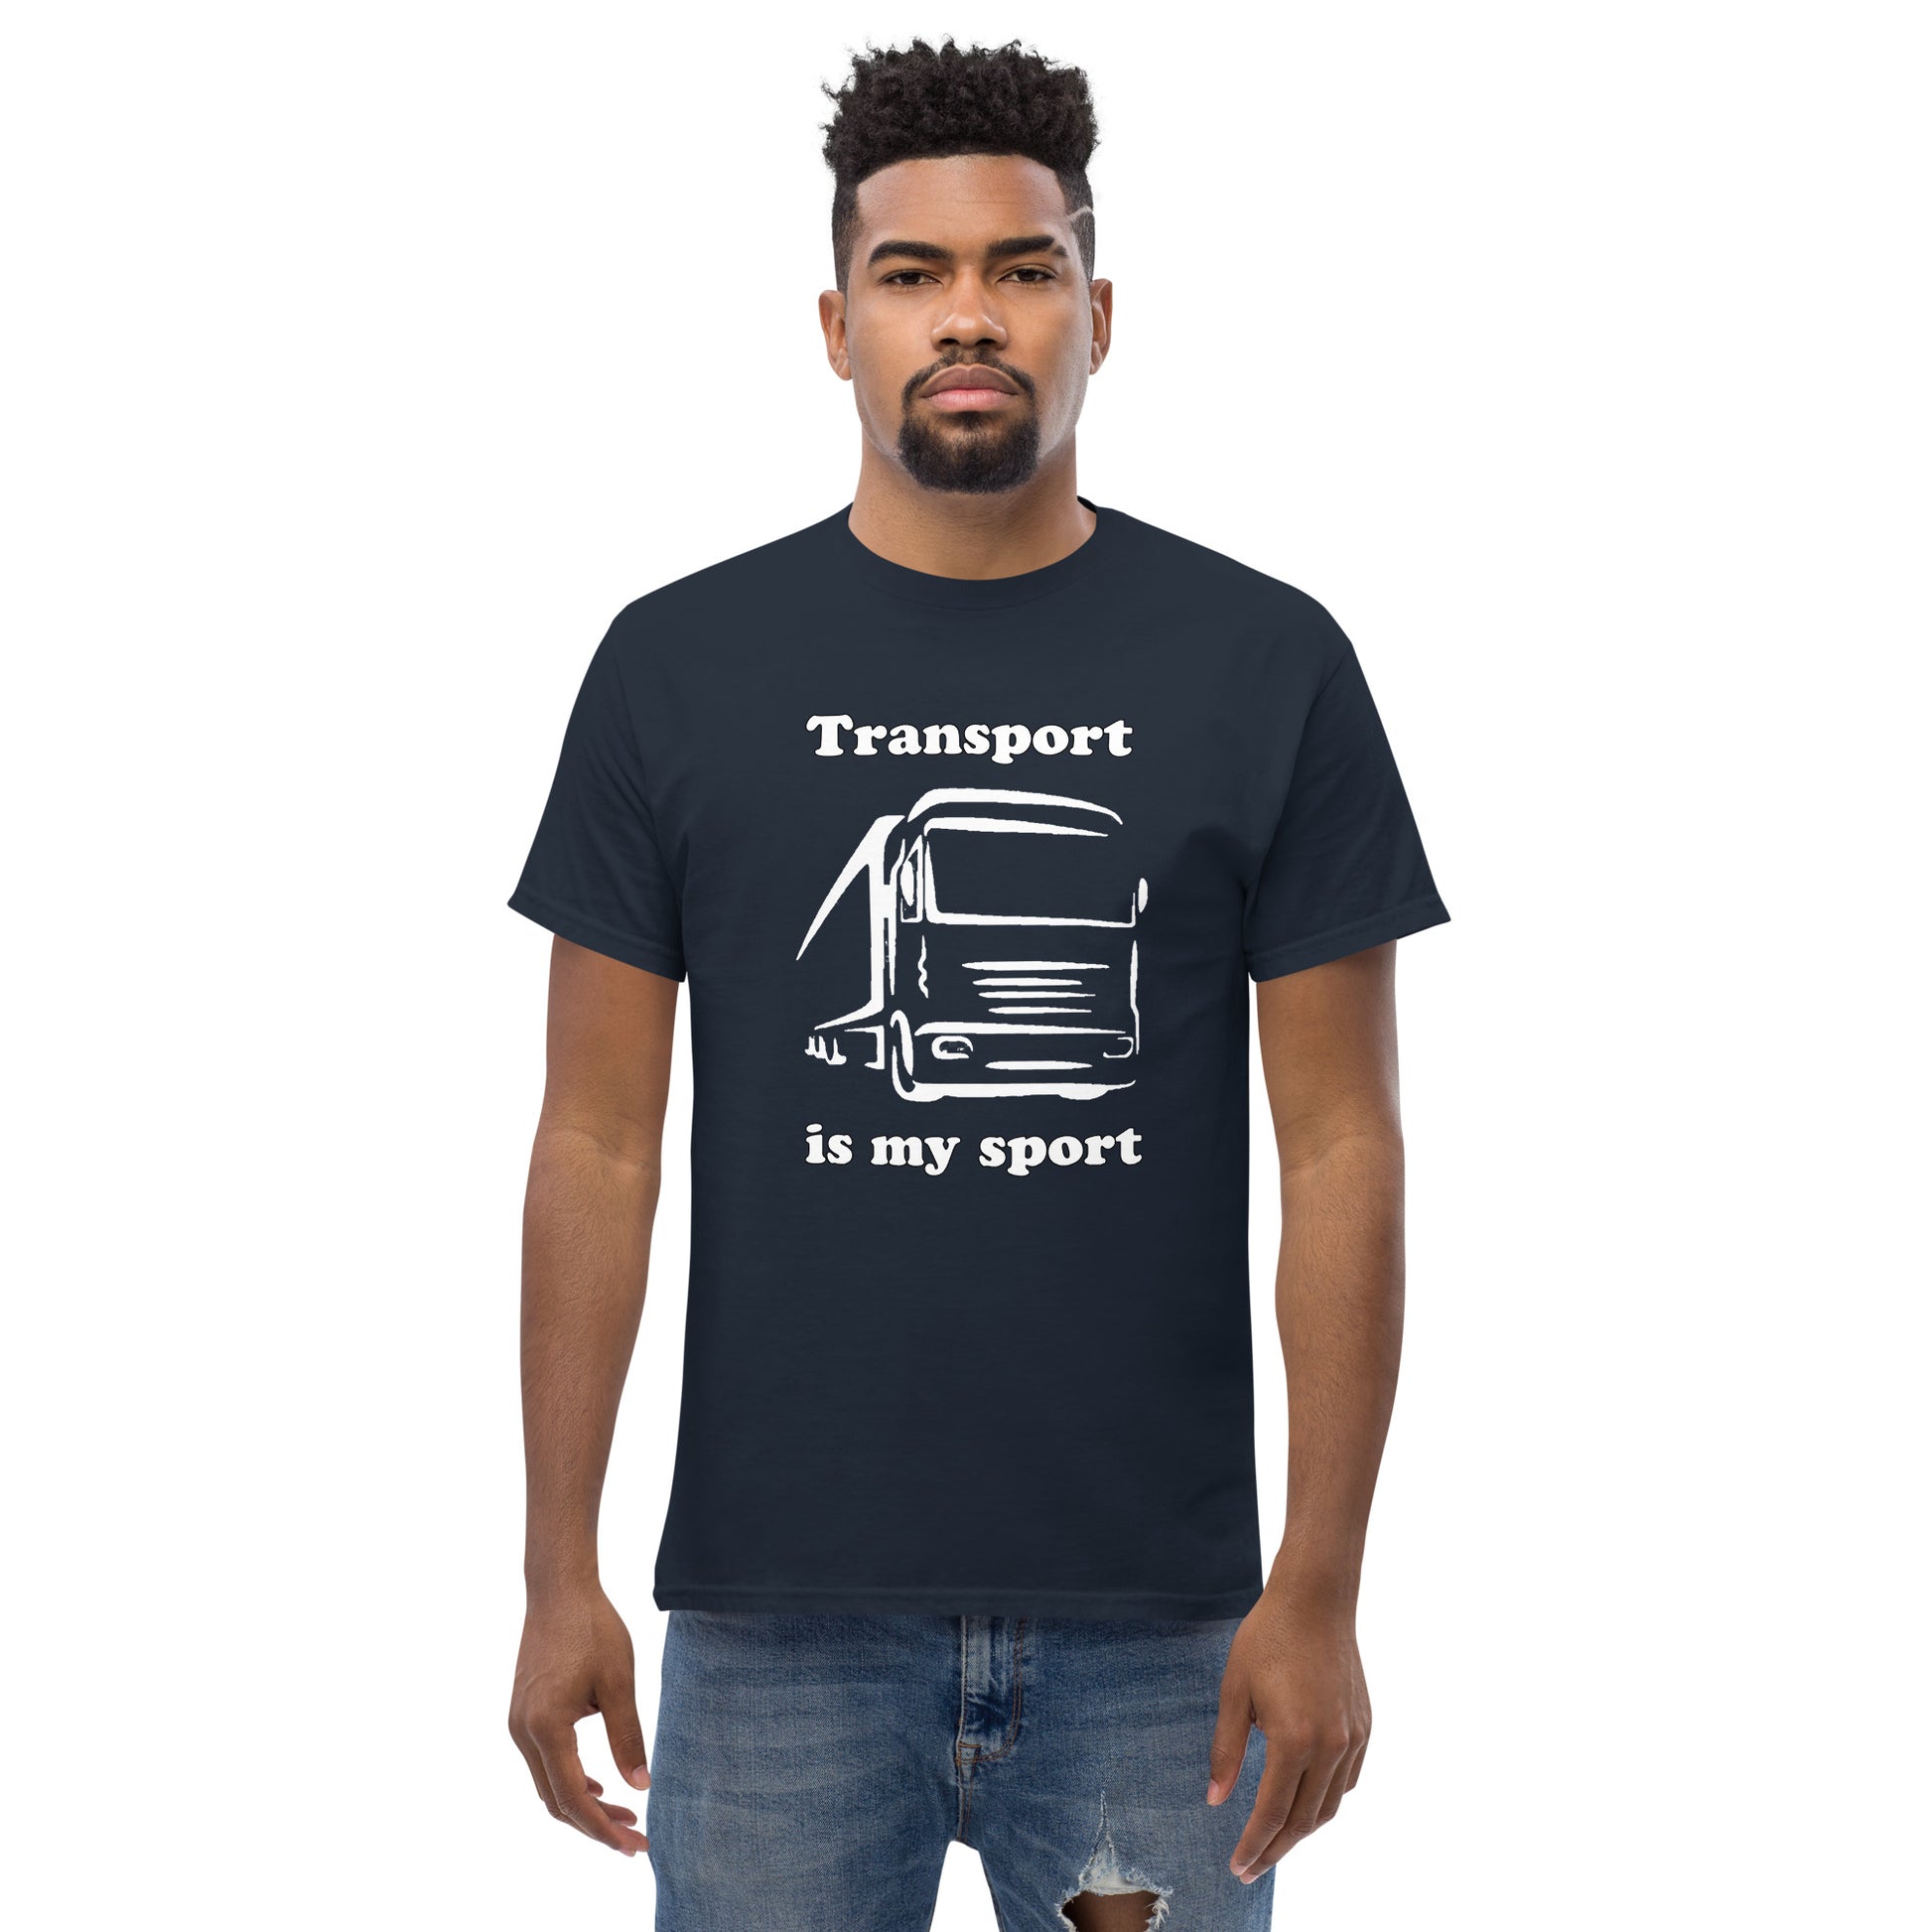 Man with navy blue t-shirt with picture of truck and text "Transport is my sport"